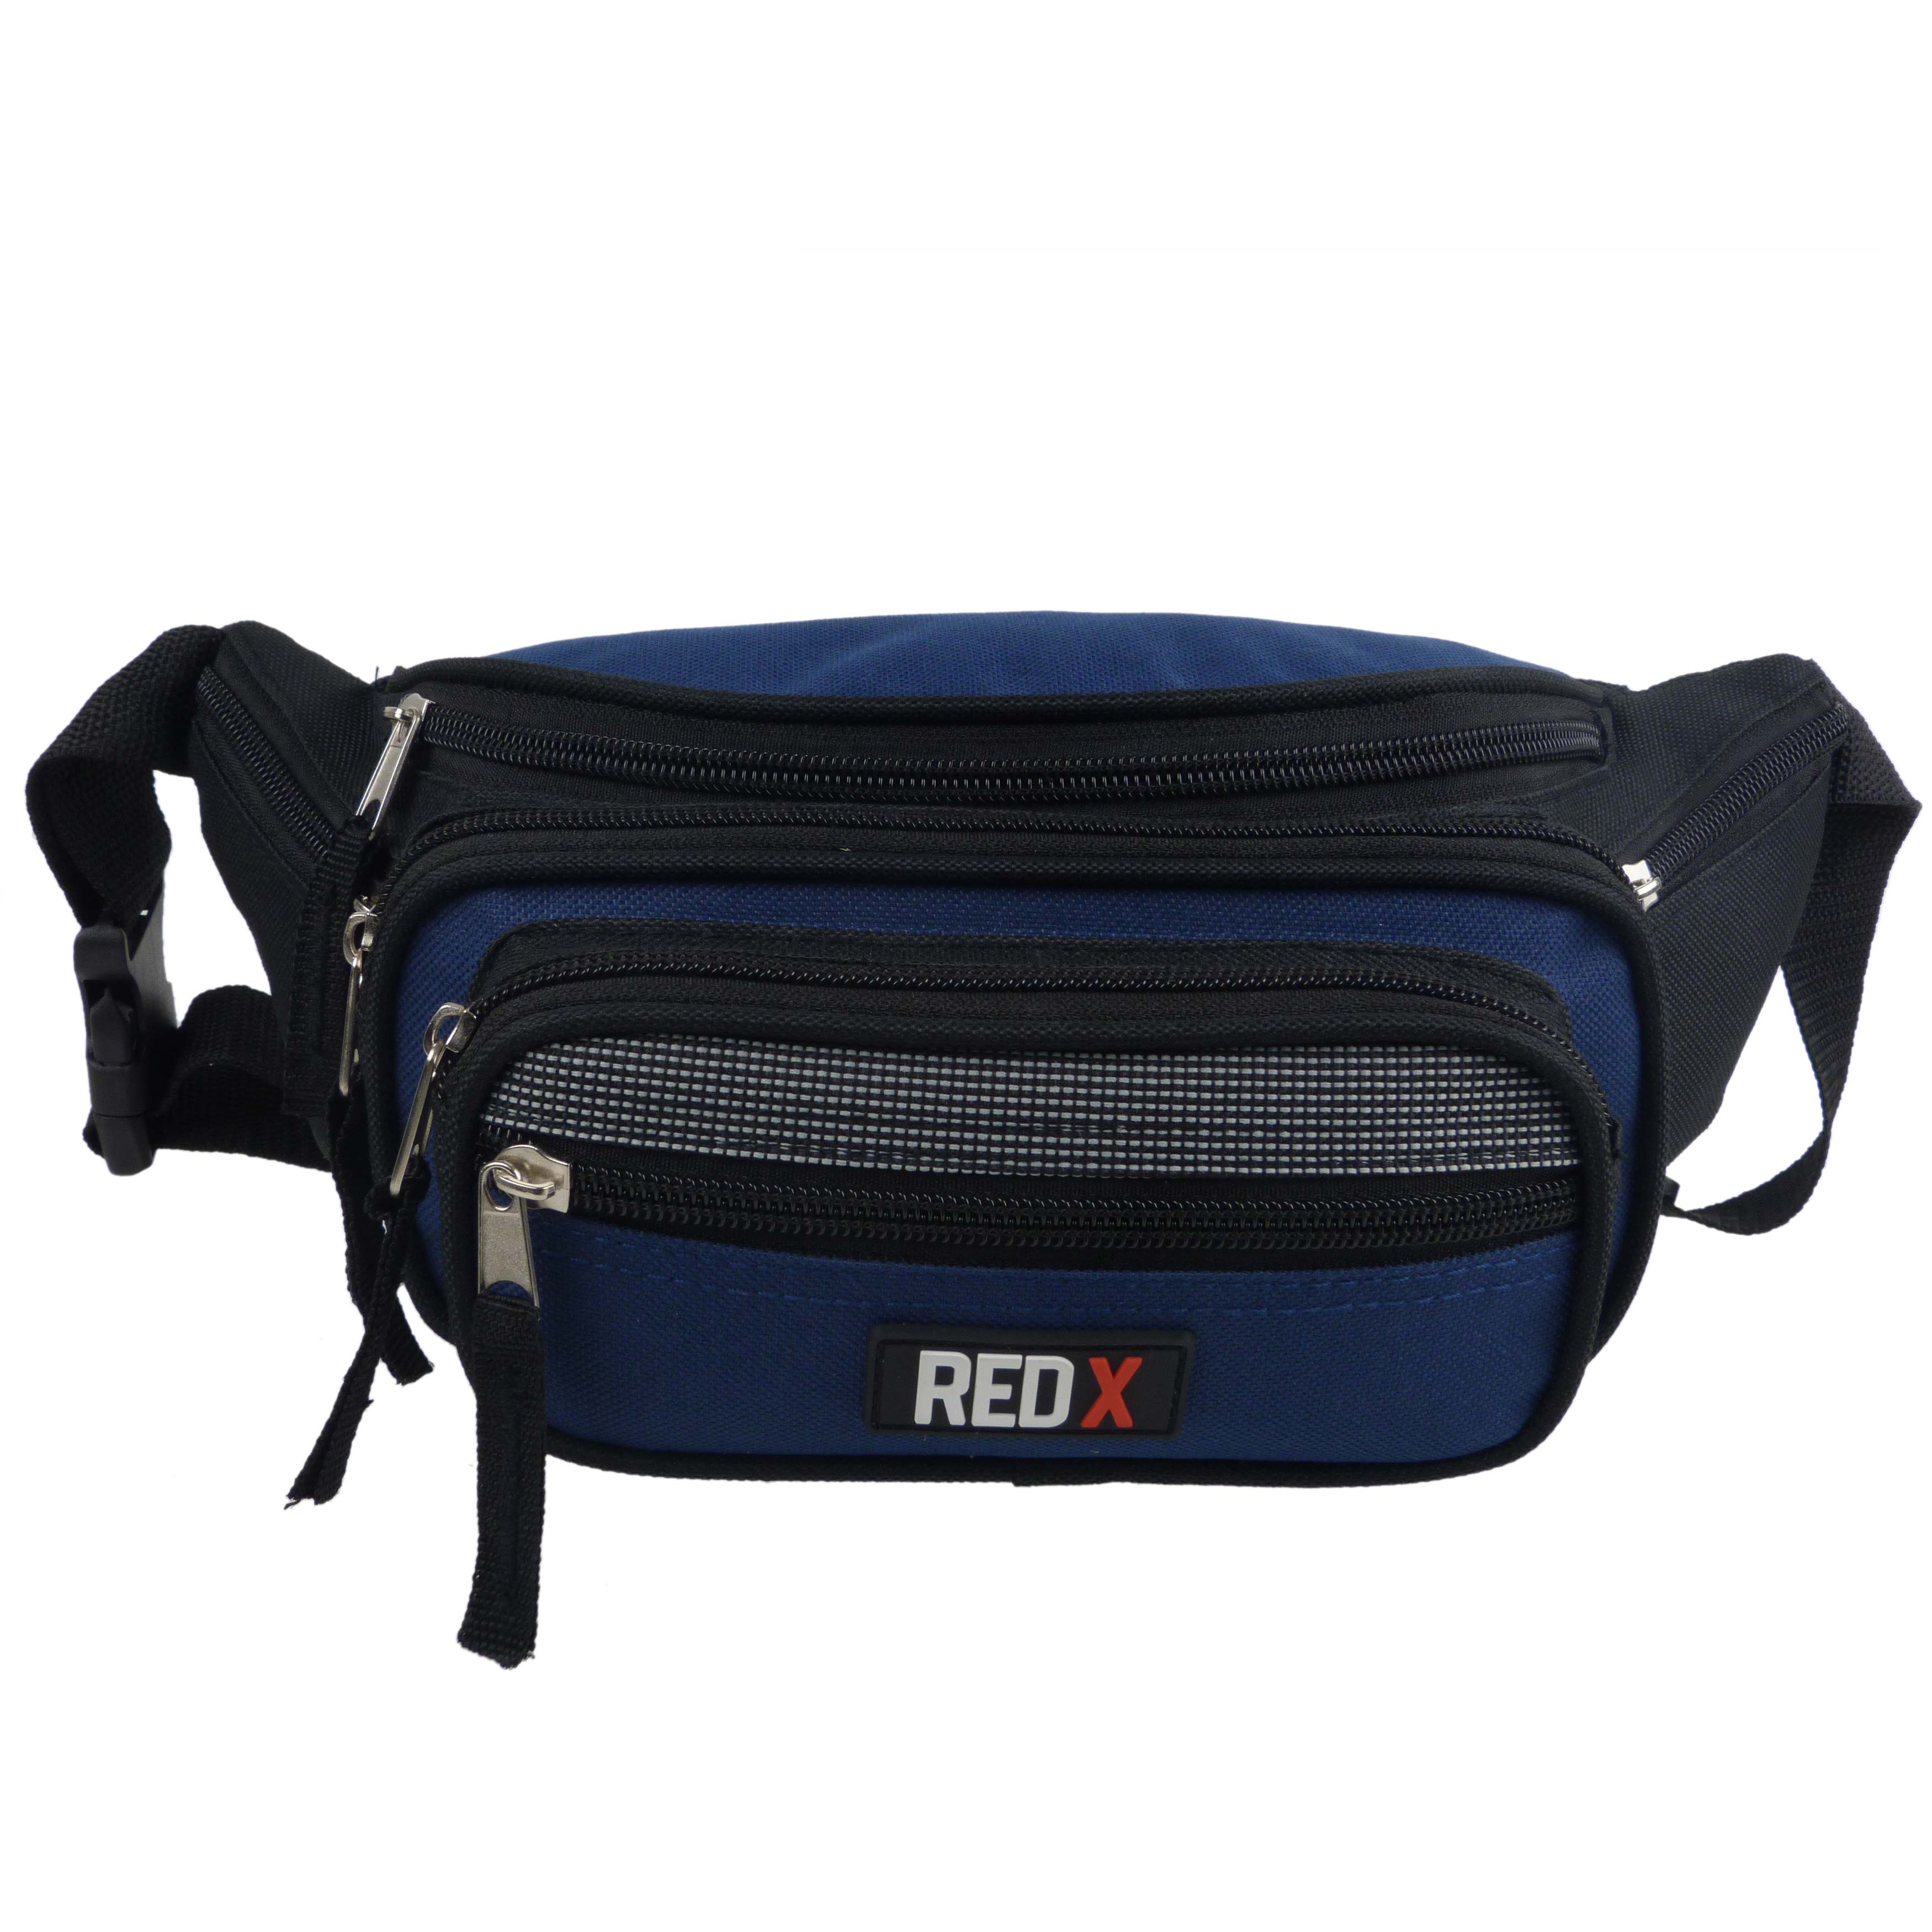 Unisex Canvas Large Bum Bag by RED X Travel Fanny Pack Waist 7 Pockets ...